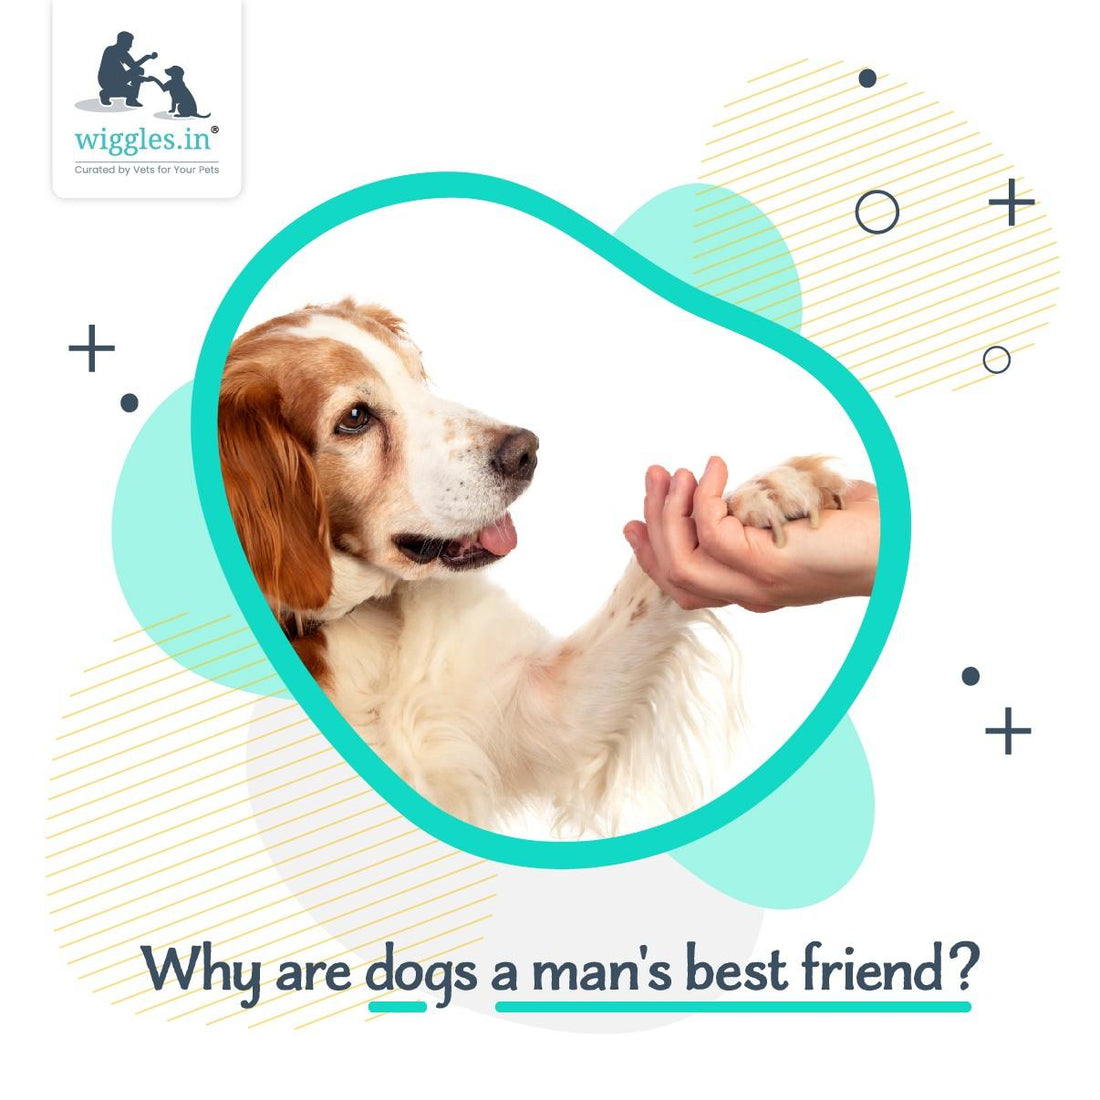 11 Reasons Why Dogs Are a Man’s Best Friend